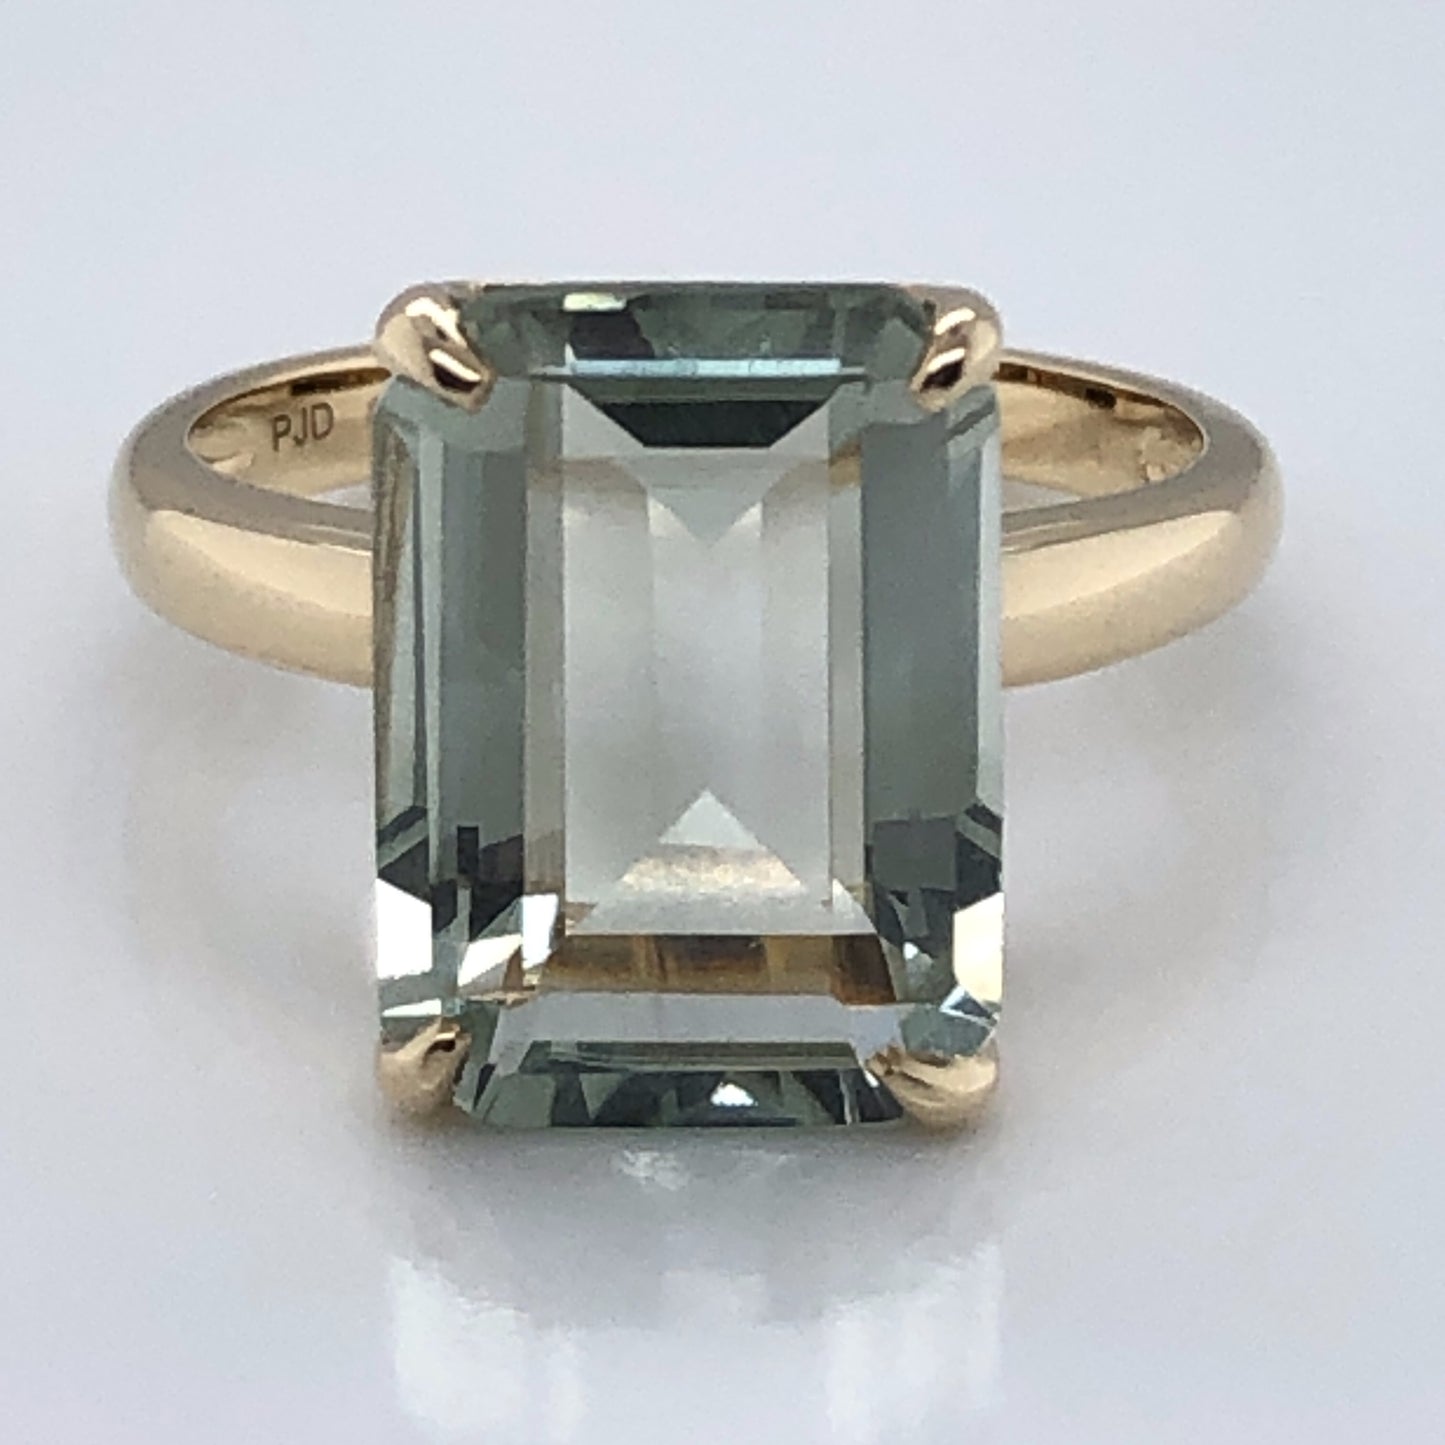 9ct Gold Green Amethyst Cocktail Ring